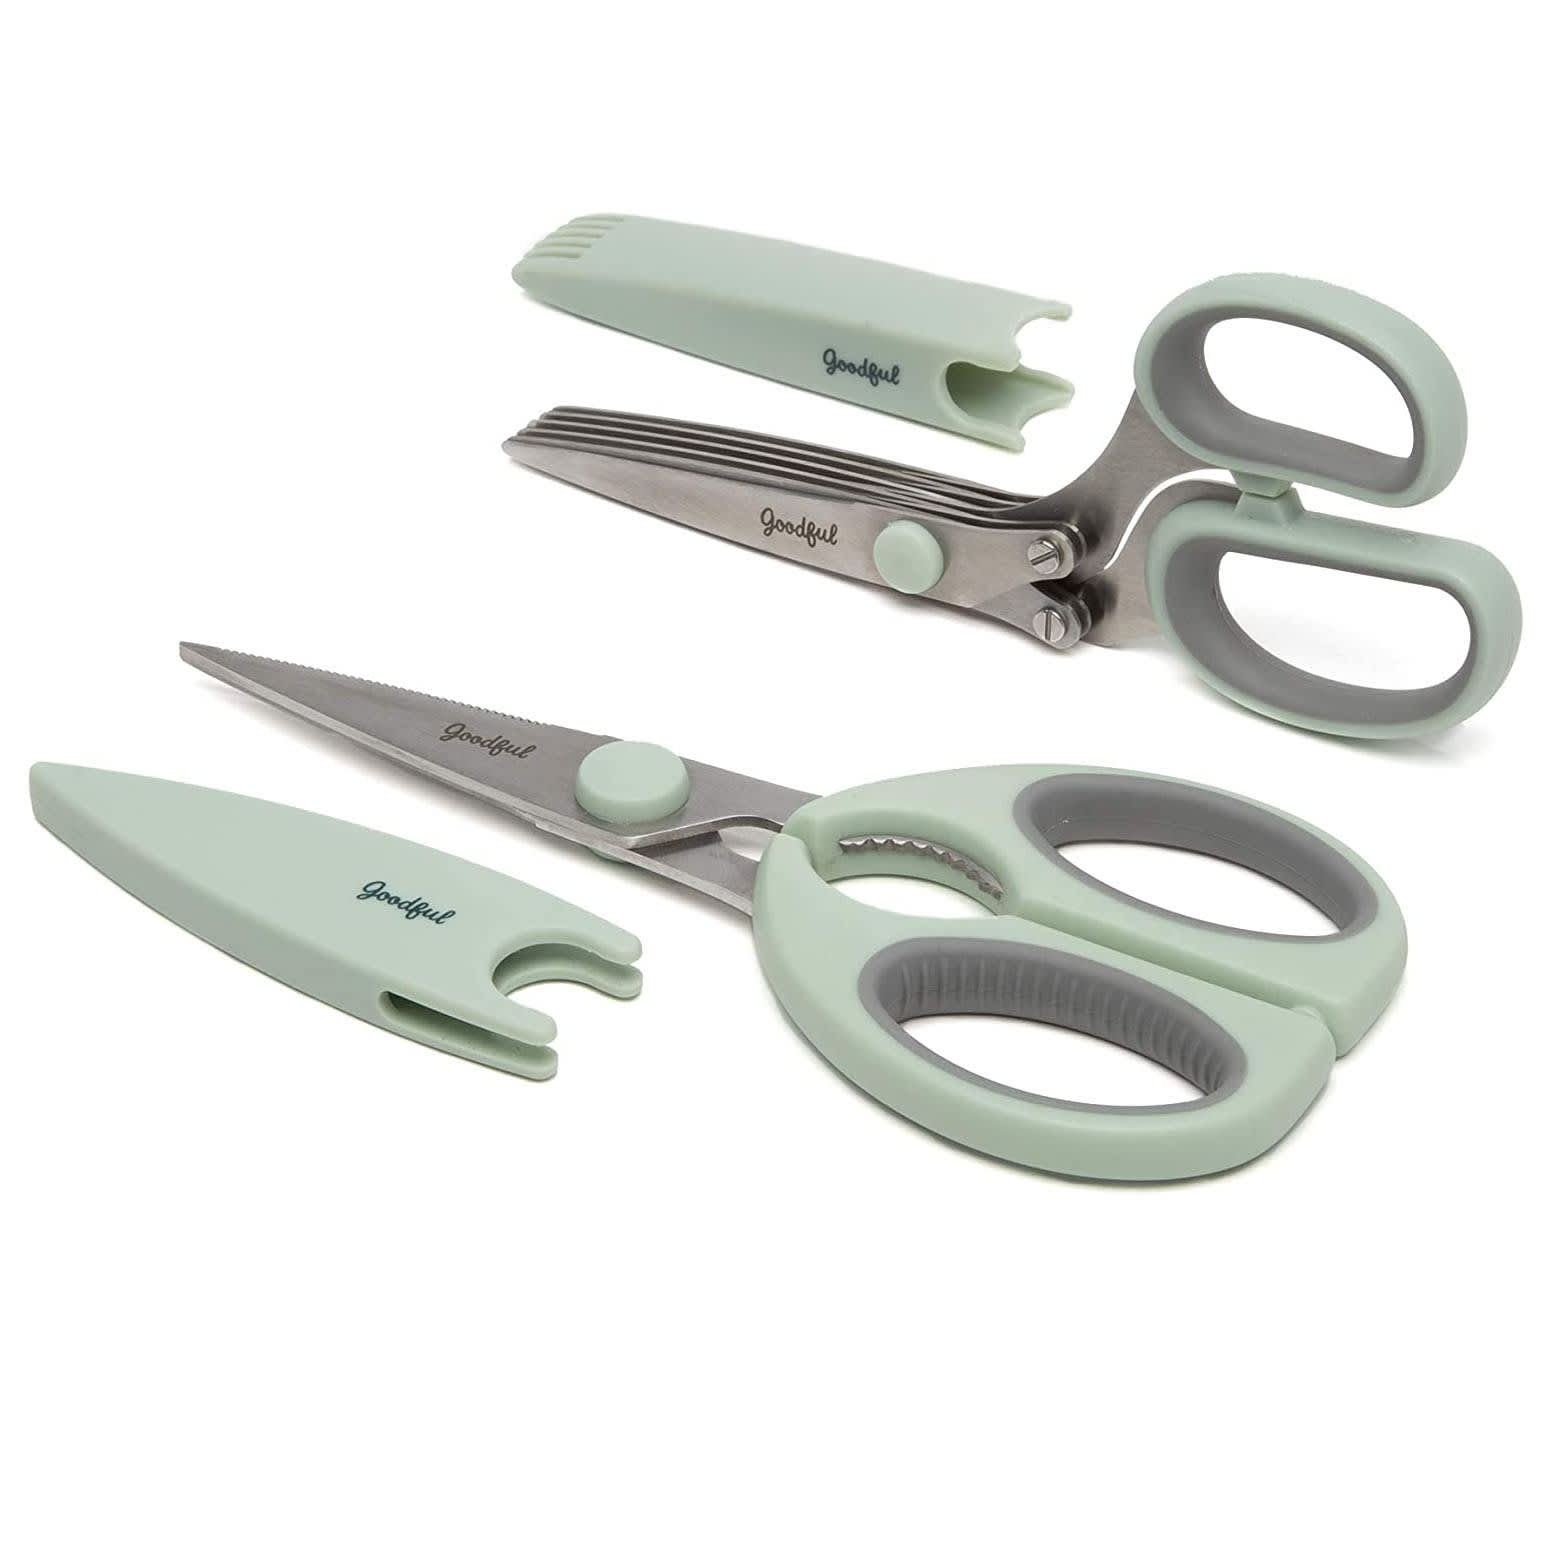 http://cdn.apartmenttherapy.info/image/upload/v1600697322/gen-workflow/product-database/Goodful-Kitchen-Shears.jpg